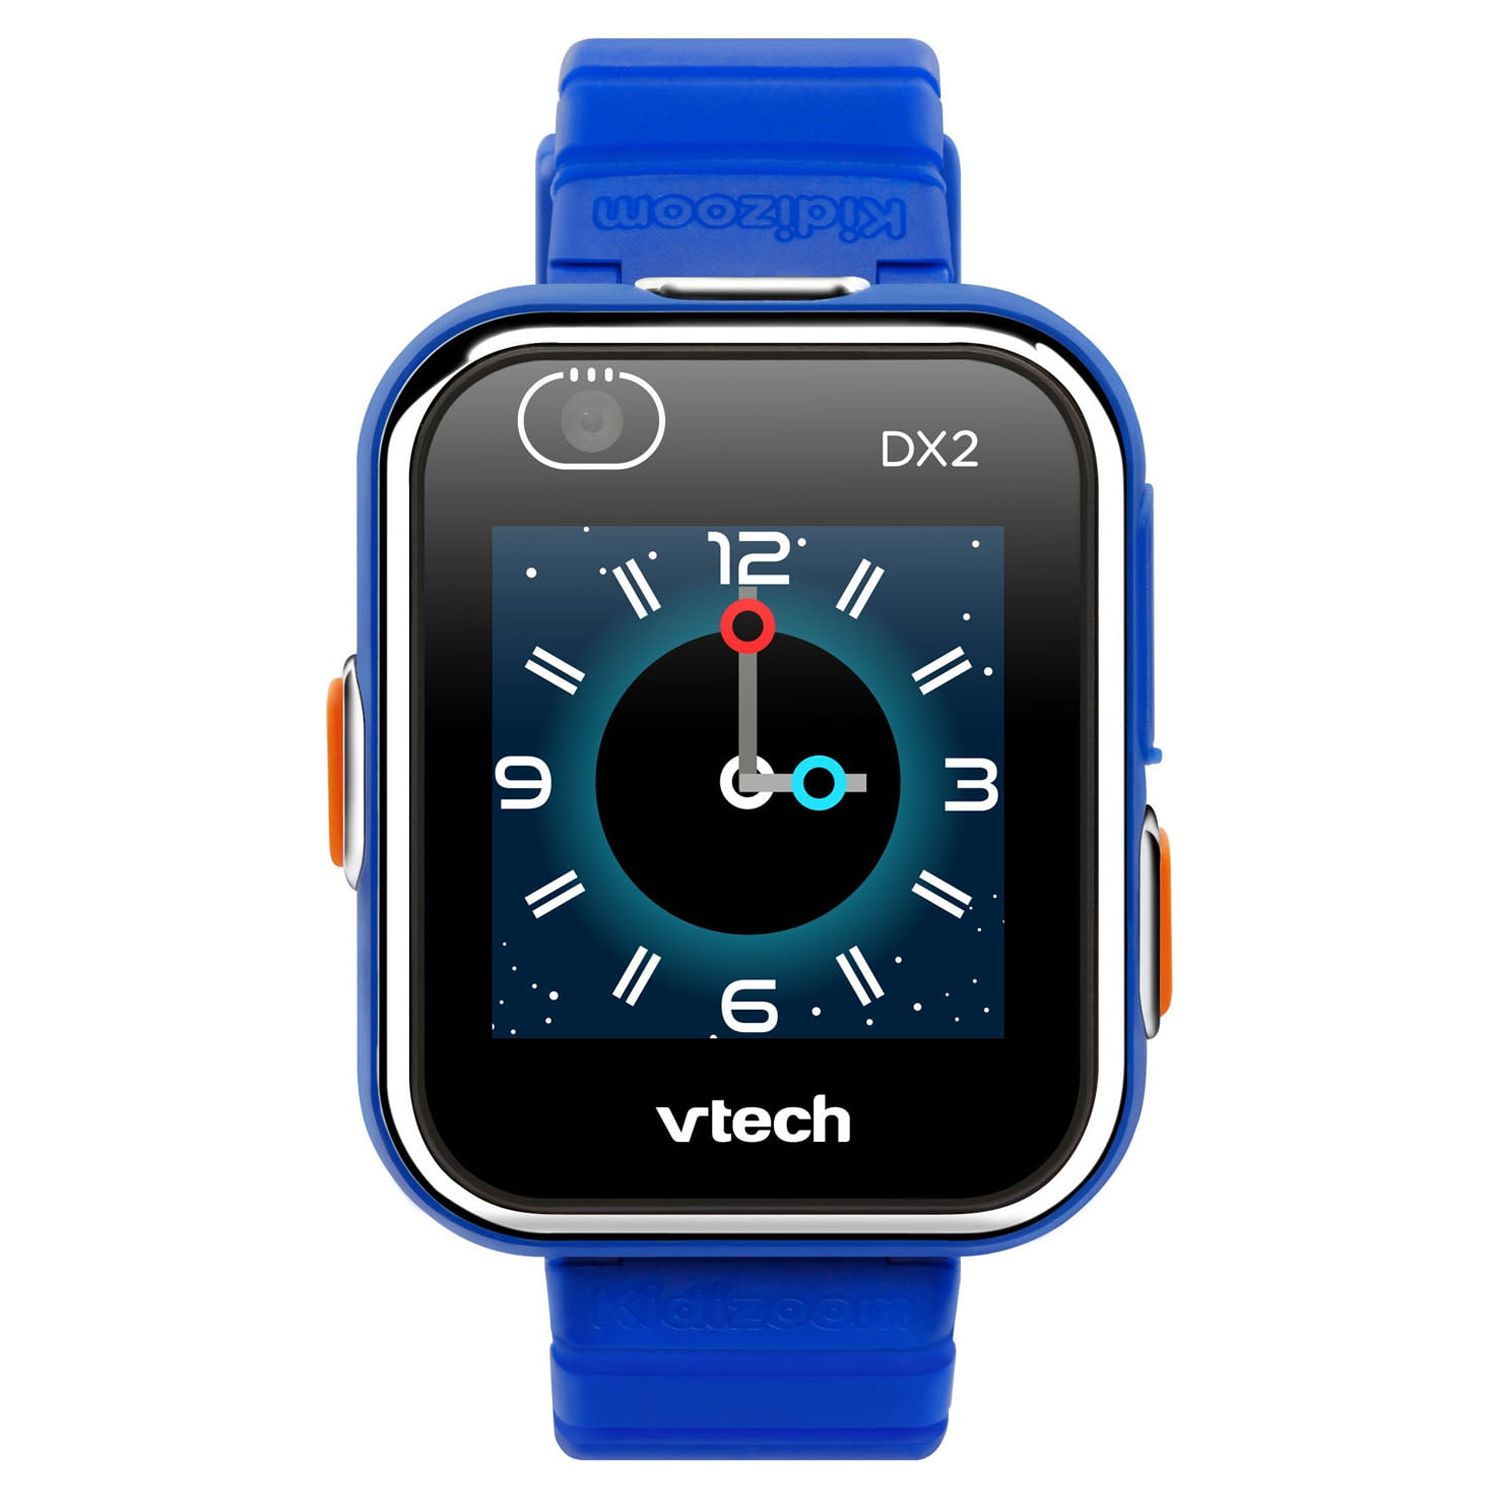 VTech, KidiZoom Smartwatch DX2, Smart Watch for Kids, Learning Watch - image 1 of 17